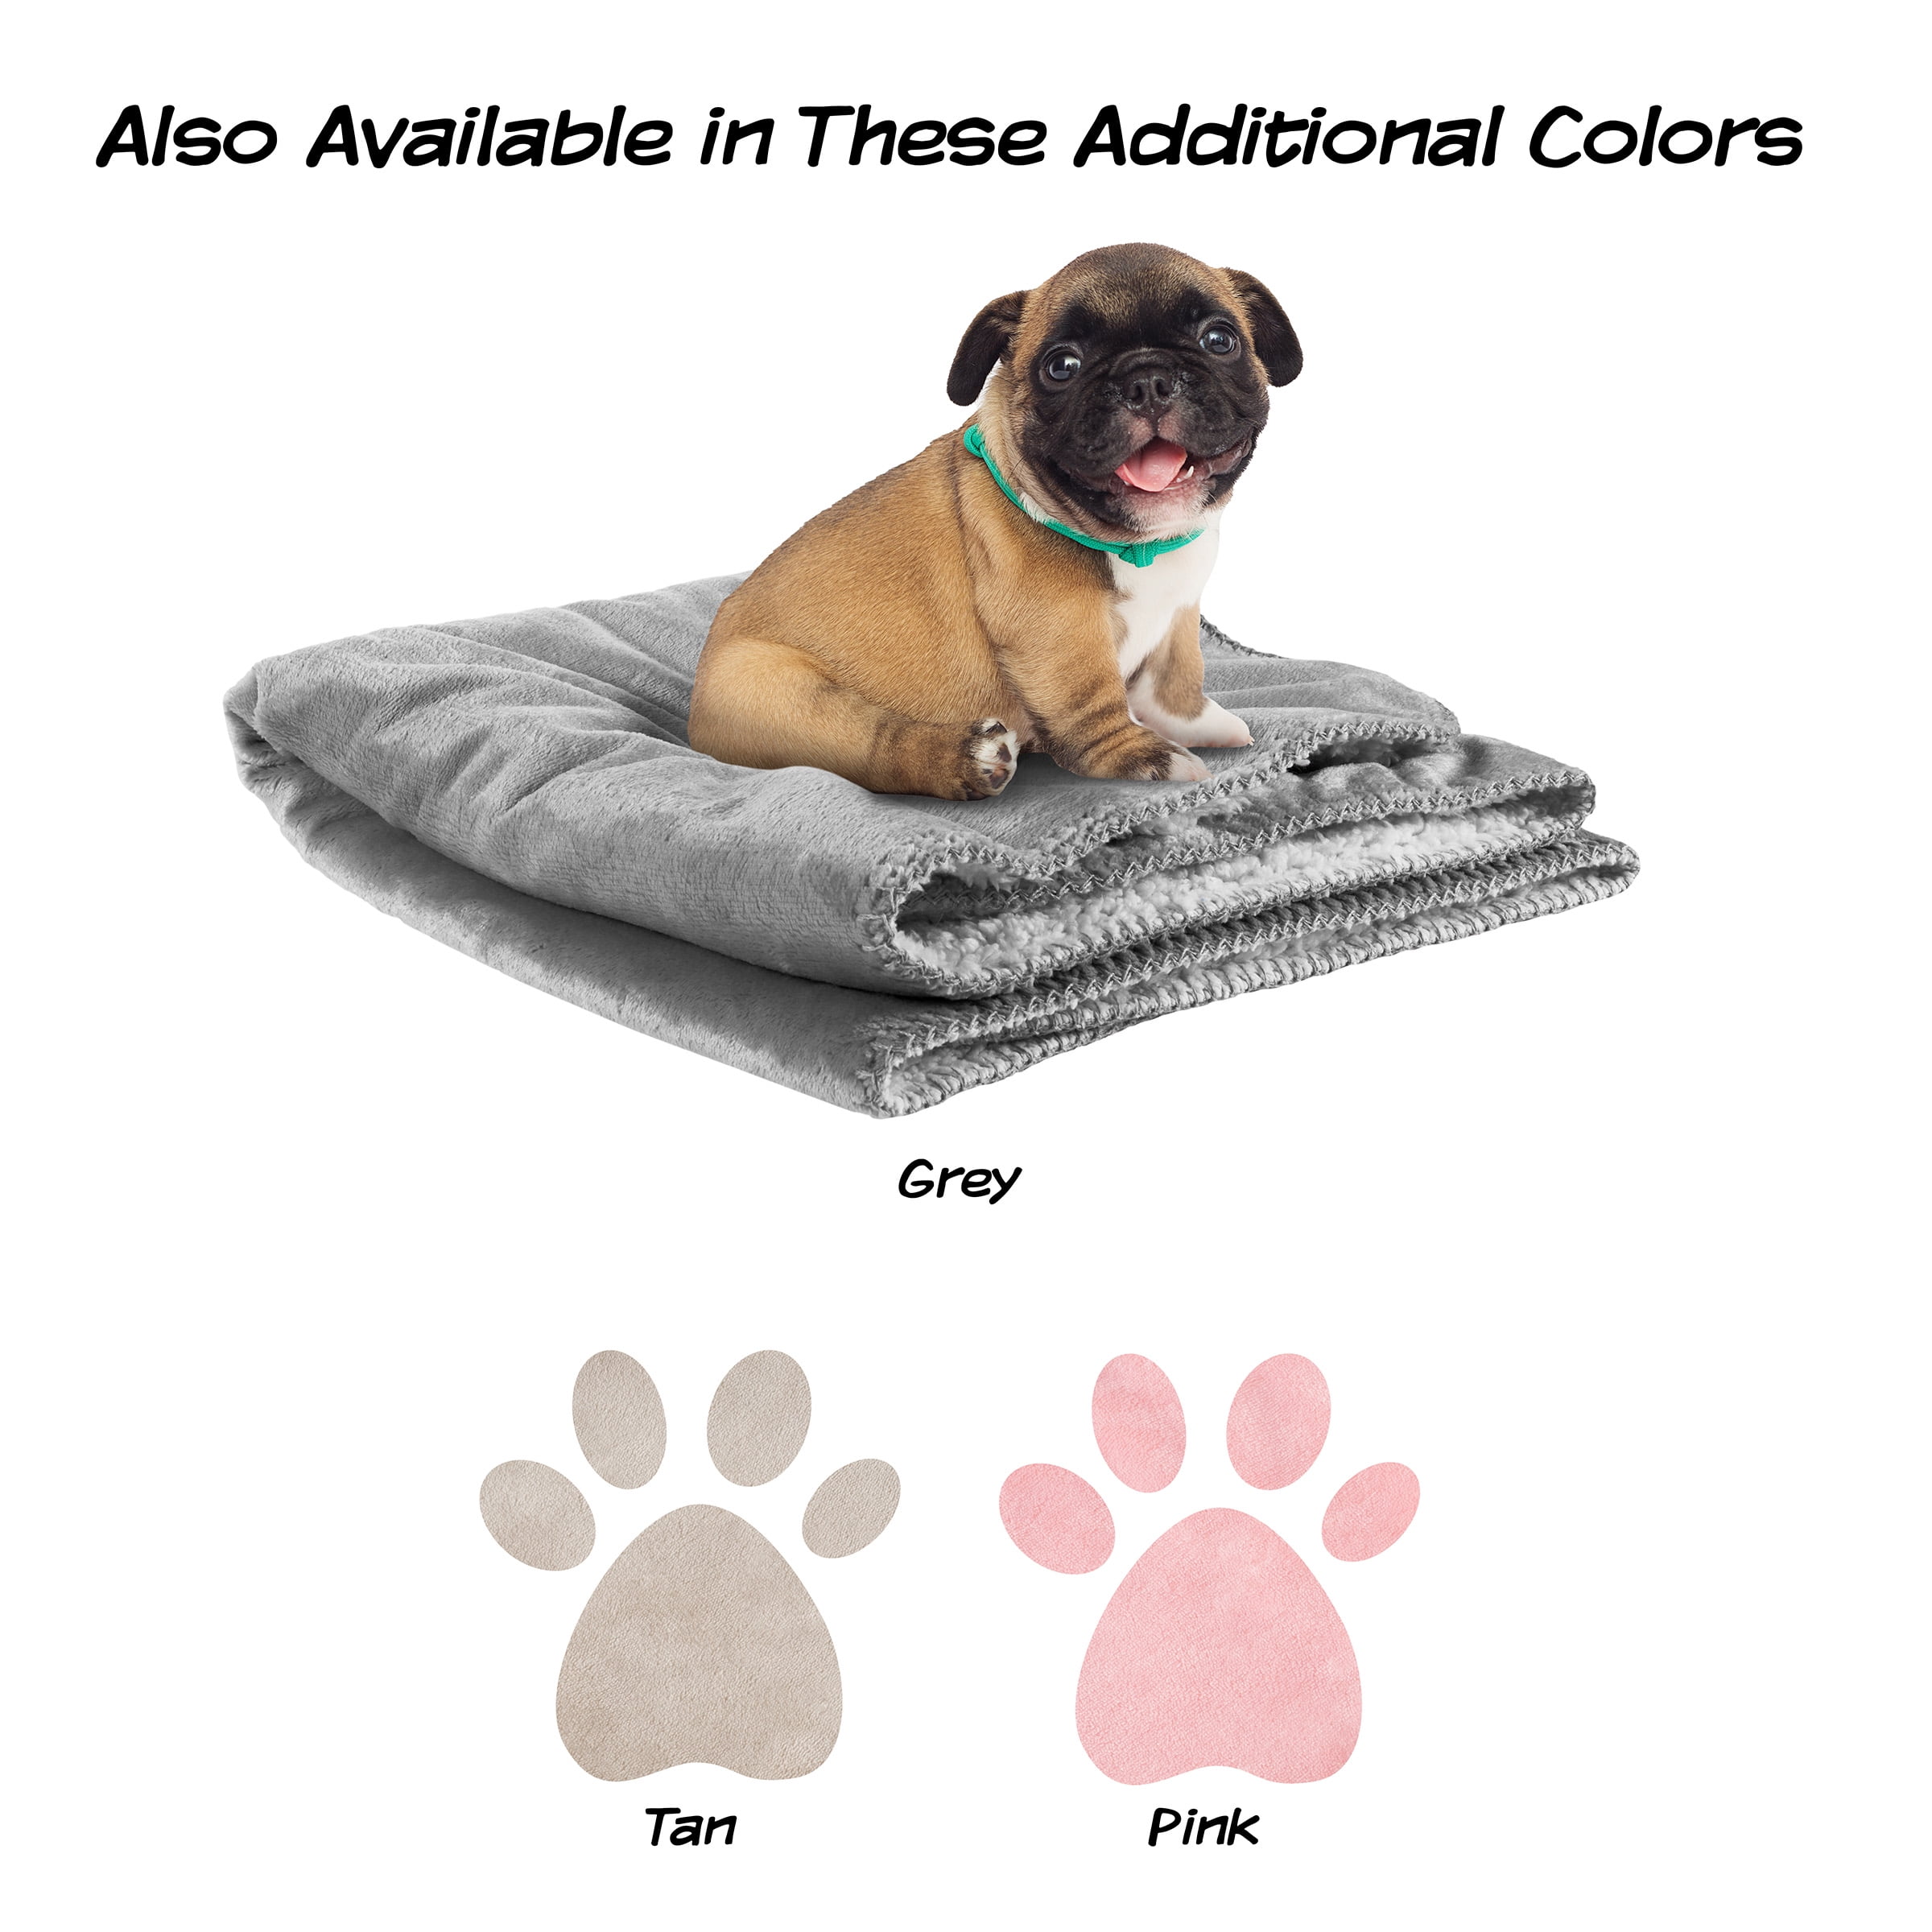 Waterproof Blanket for Bed, Reversible Baby Pet Doggy Pee Proof Fleece  Blankets, Large Couch Sofa Cover Furniture Boat Mattress Protector, King  Size